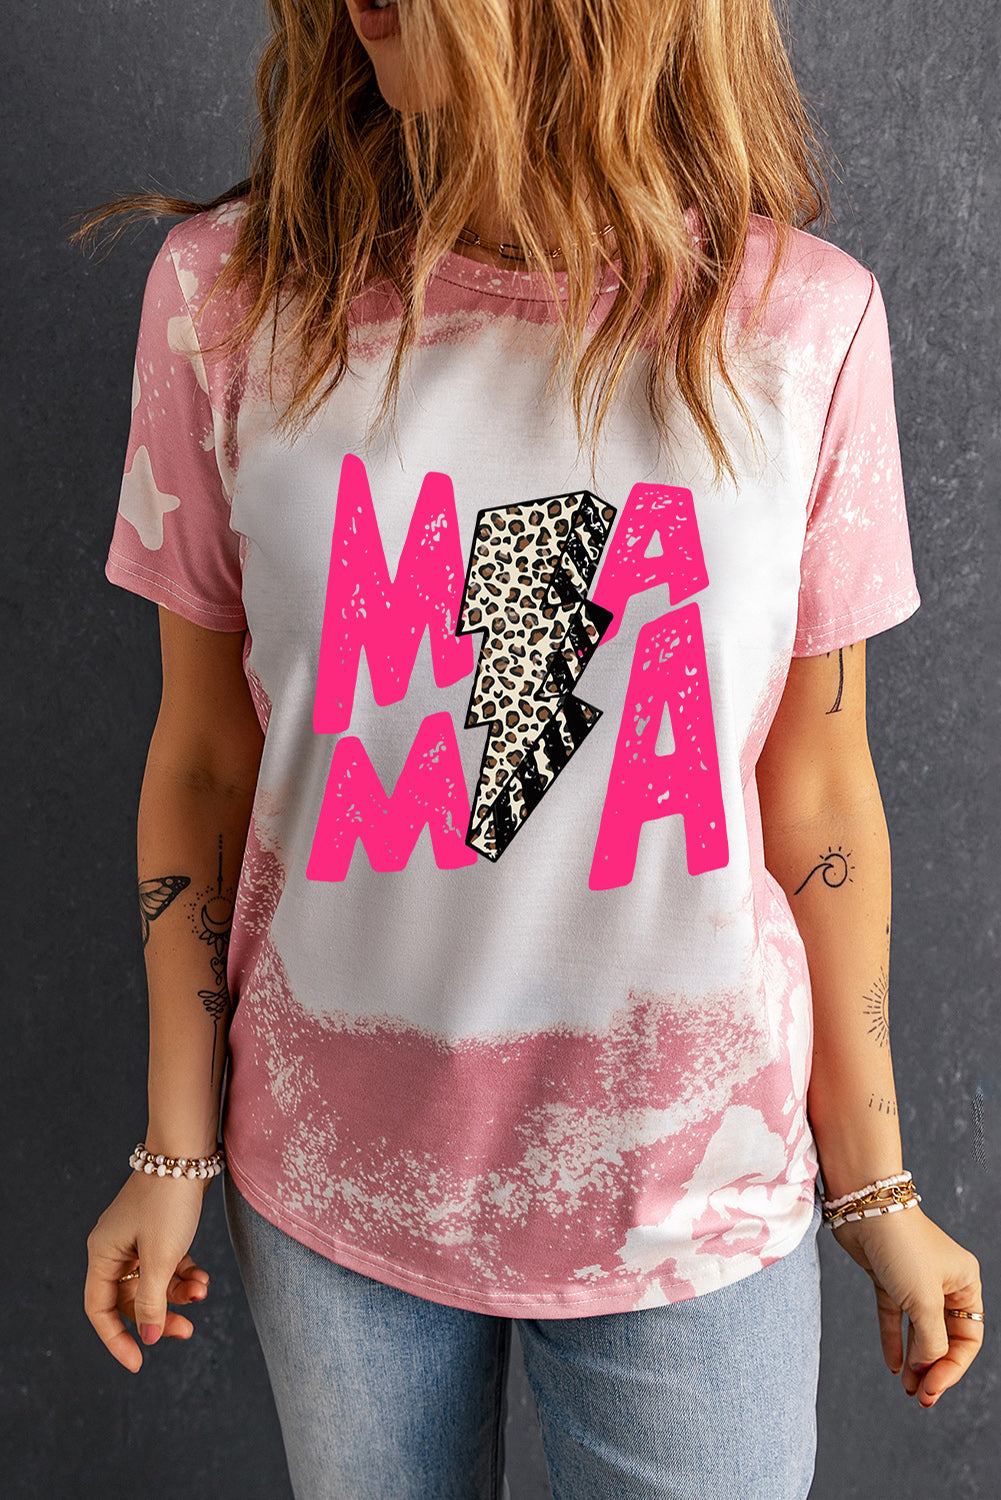 MAMA Graphic Printed Tee Shirt The Stout Steer